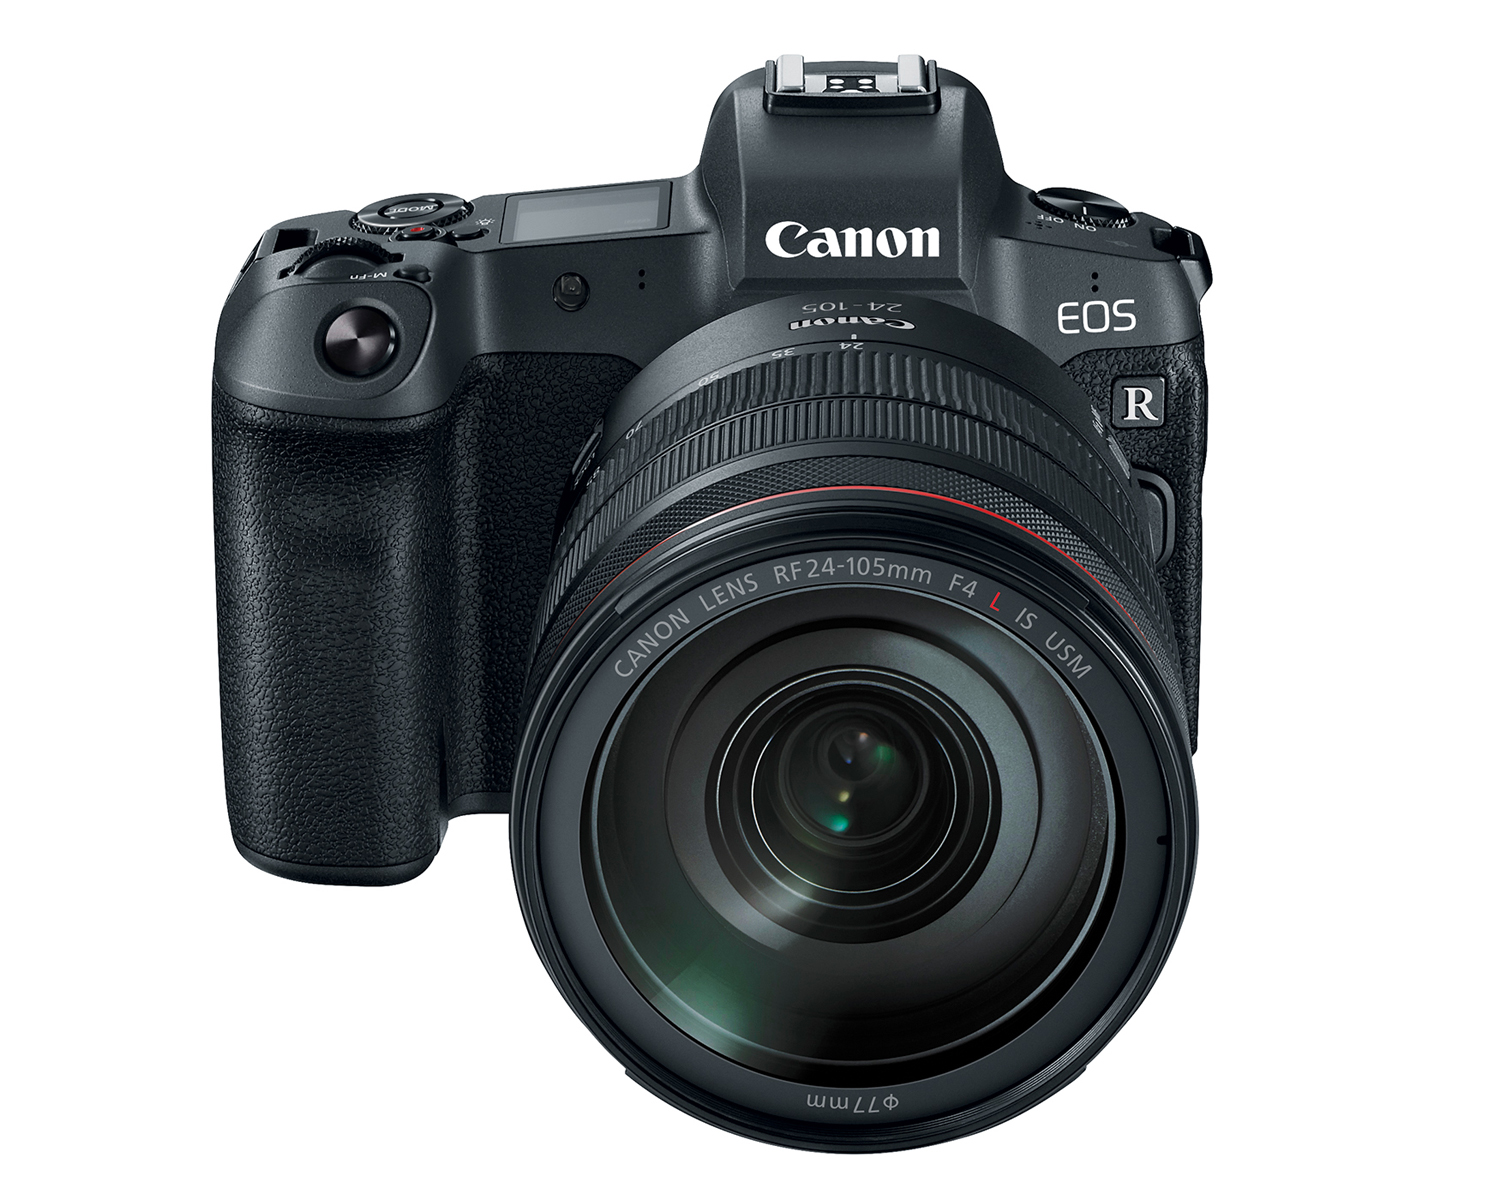 Fixation now servicing Canon's EOS R series cameras and lenses